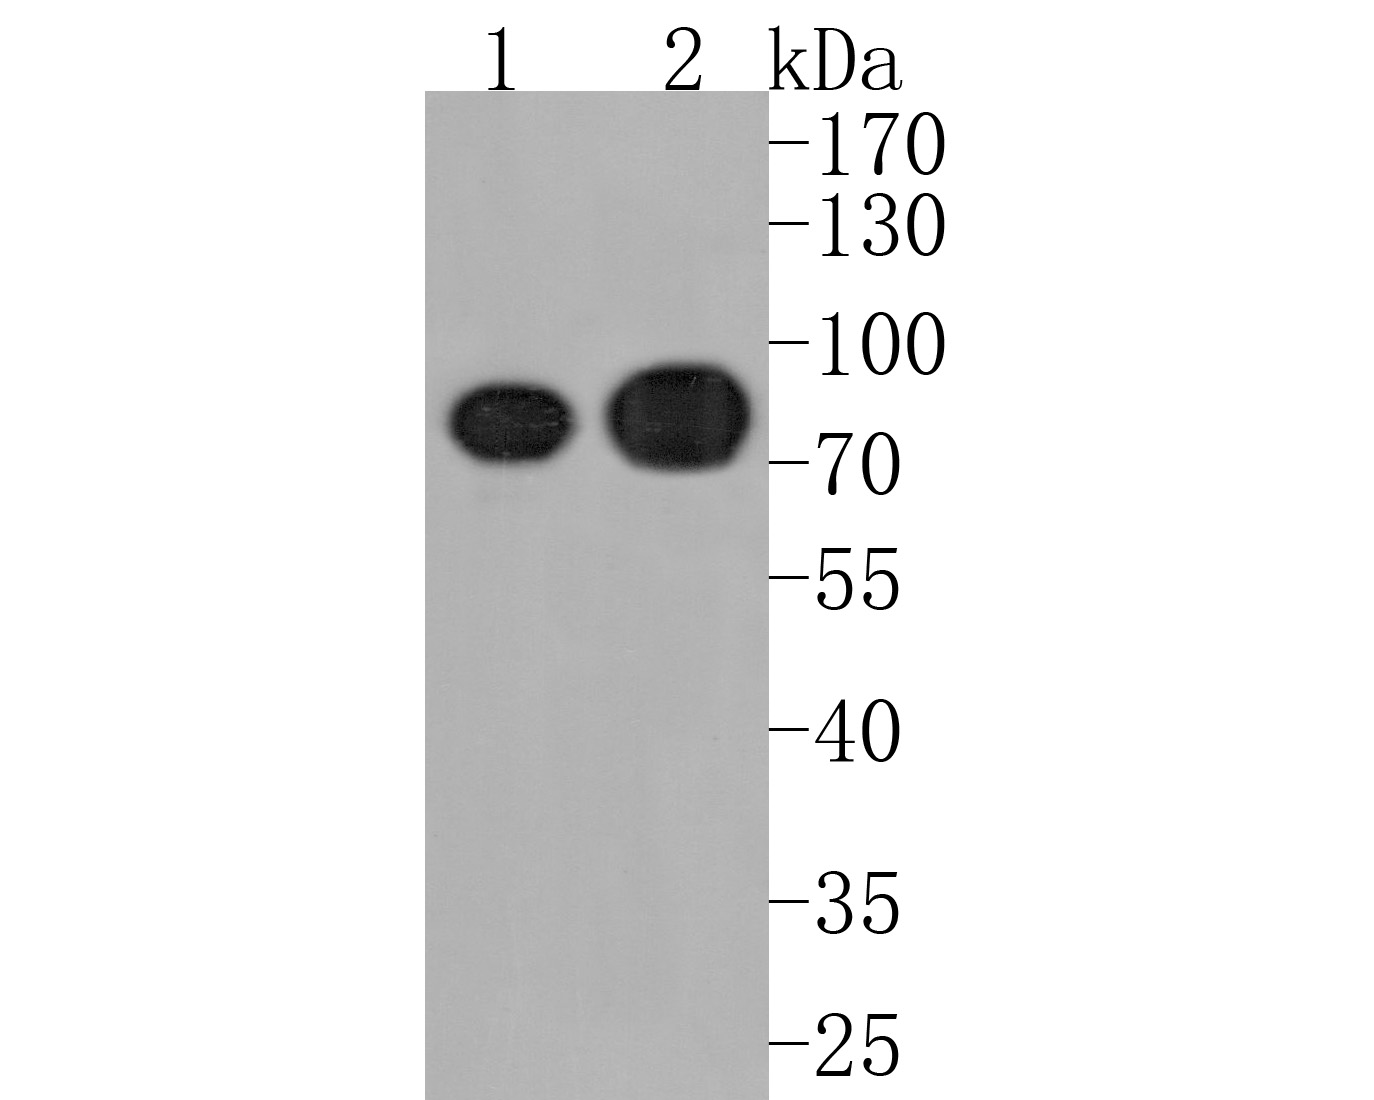 Western blot analysis of TUG on different lysates. Proteins were transferred to a PVDF membrane and blocked with 5% BSA in PBS for 1 hour at room temperature. The primary antibody (HA720029, 1/500) was used in 5% BSA at room temperature for 2 hours. Goat Anti-Rabbit IgG - HRP Secondary Antibody (HA1001) at 1:200,000 dilution was used for 1 hour at room temperature.<br />
Positive control: <br />
Lane 1: K562 cell lysate<br />
Lane 2: NIH/3T3 cell lysate